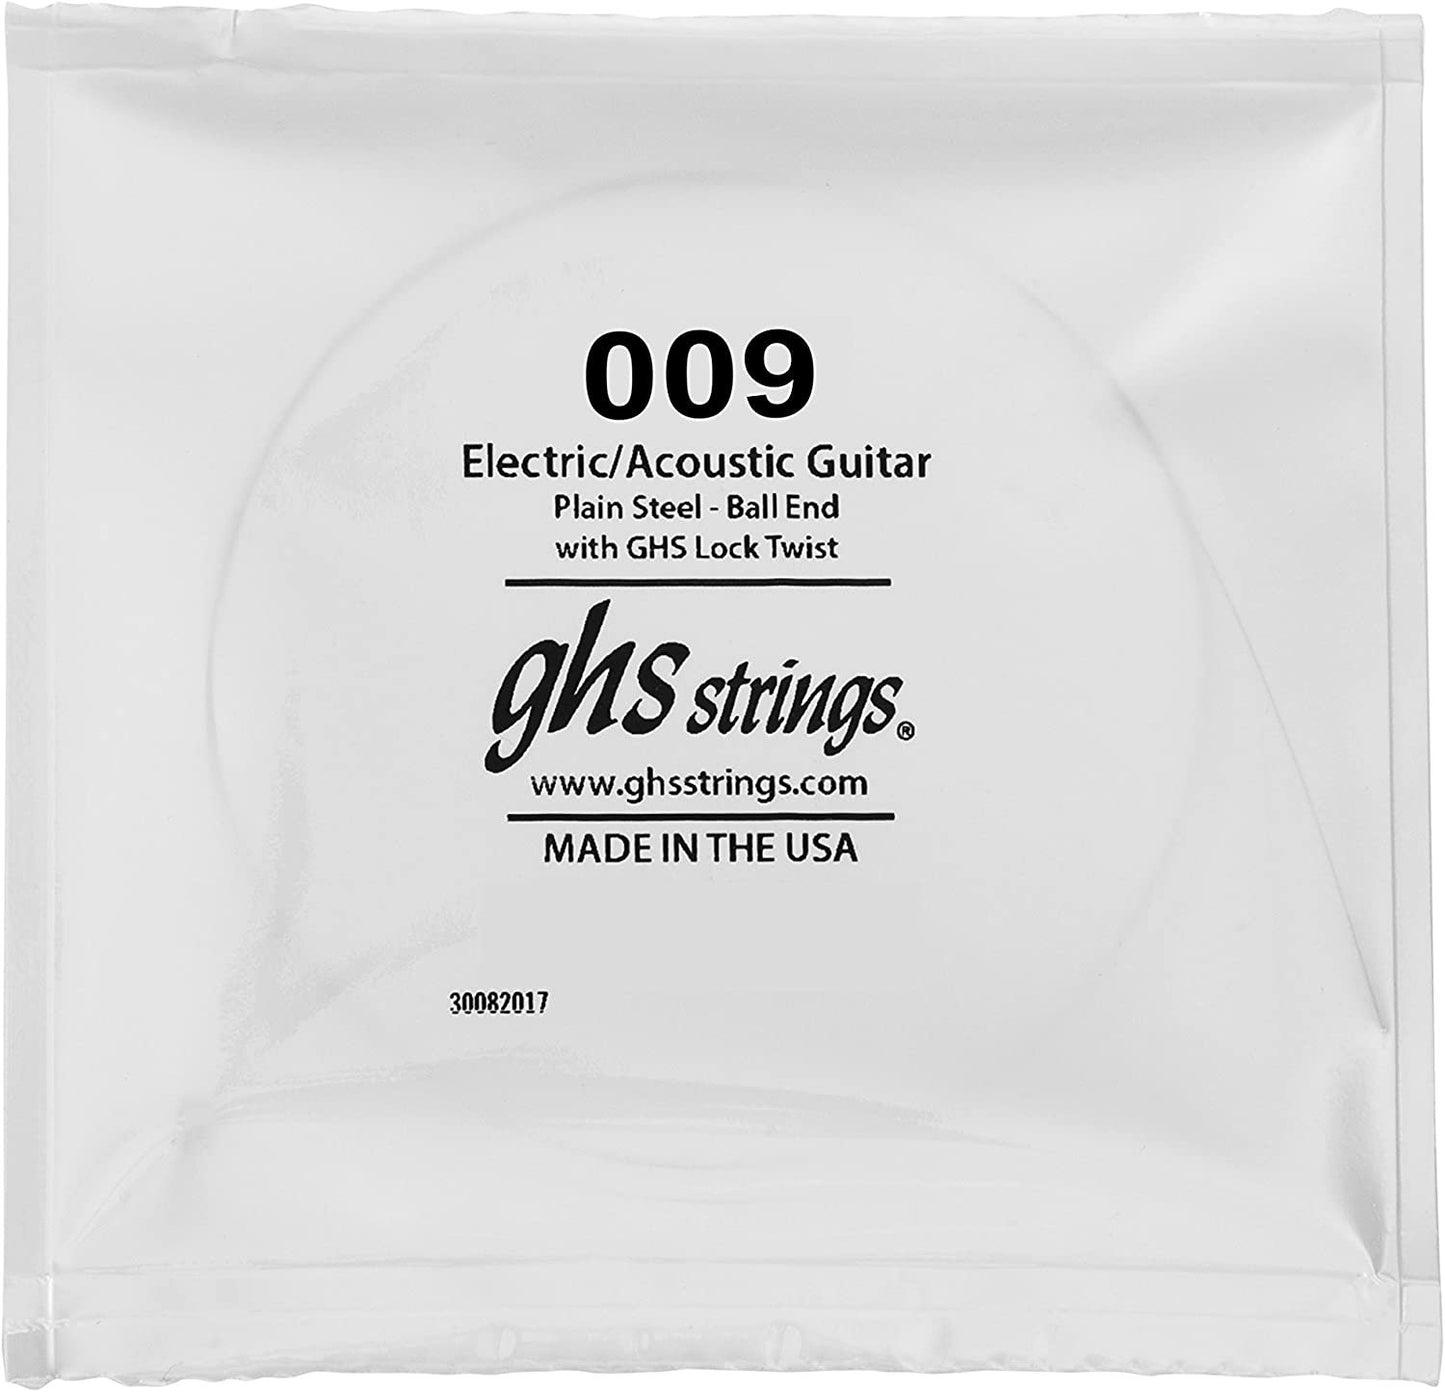 GHS STRINGS - GUITAR BOOMERS GBXL (Extra Light) - 009-042 - (3 PACK) Electric Guitar Strings